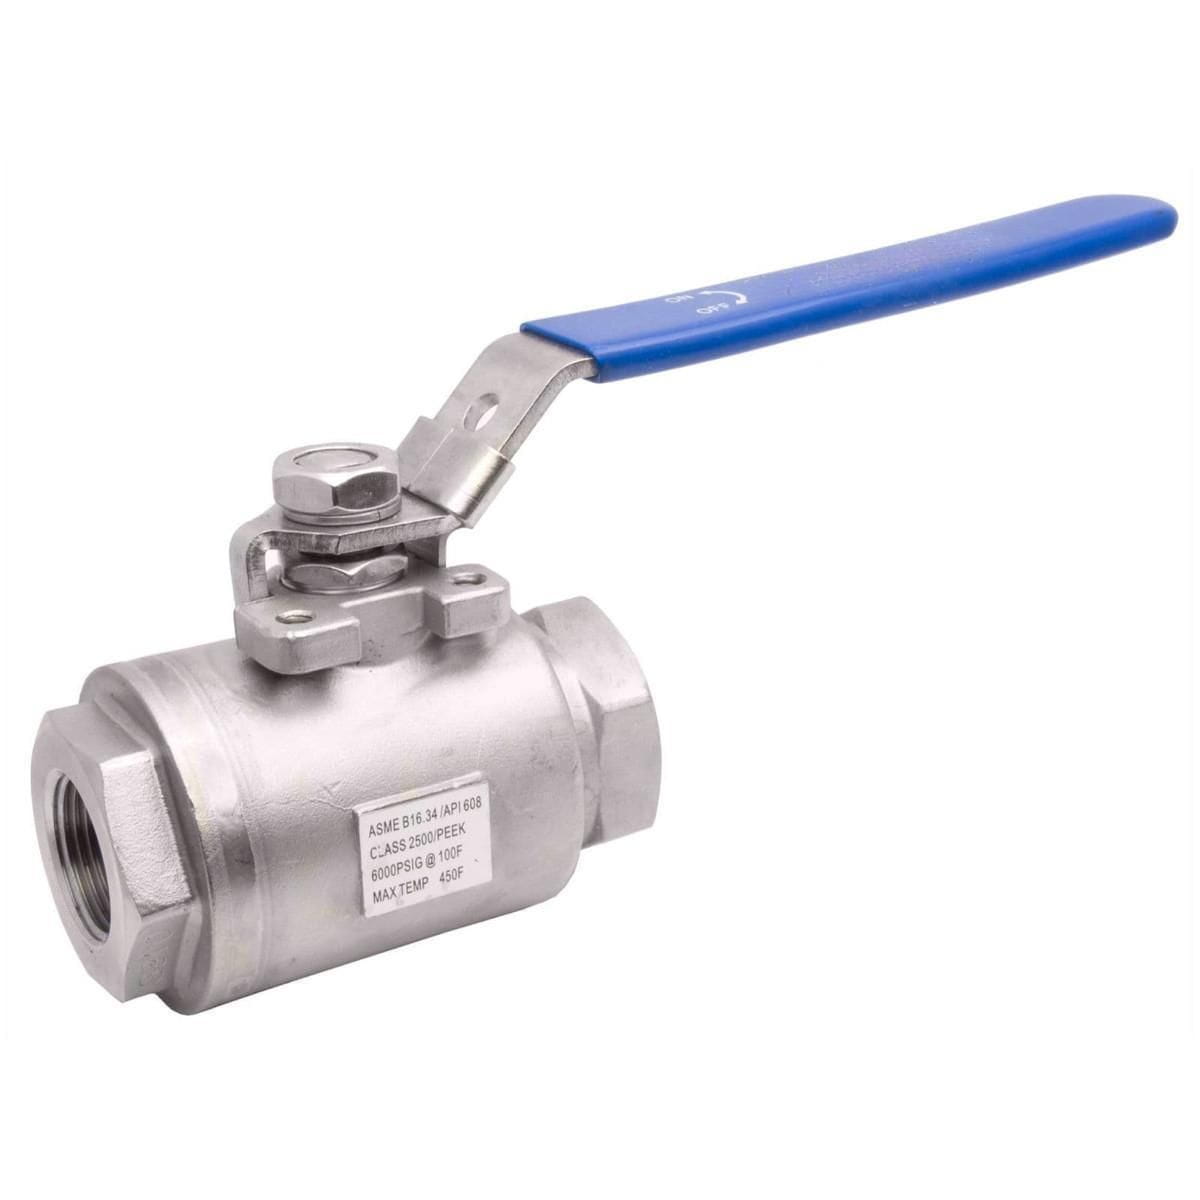 2 Piece Ball Valve, Forged Stainless Steel, 6000 PSI, 1/4IN